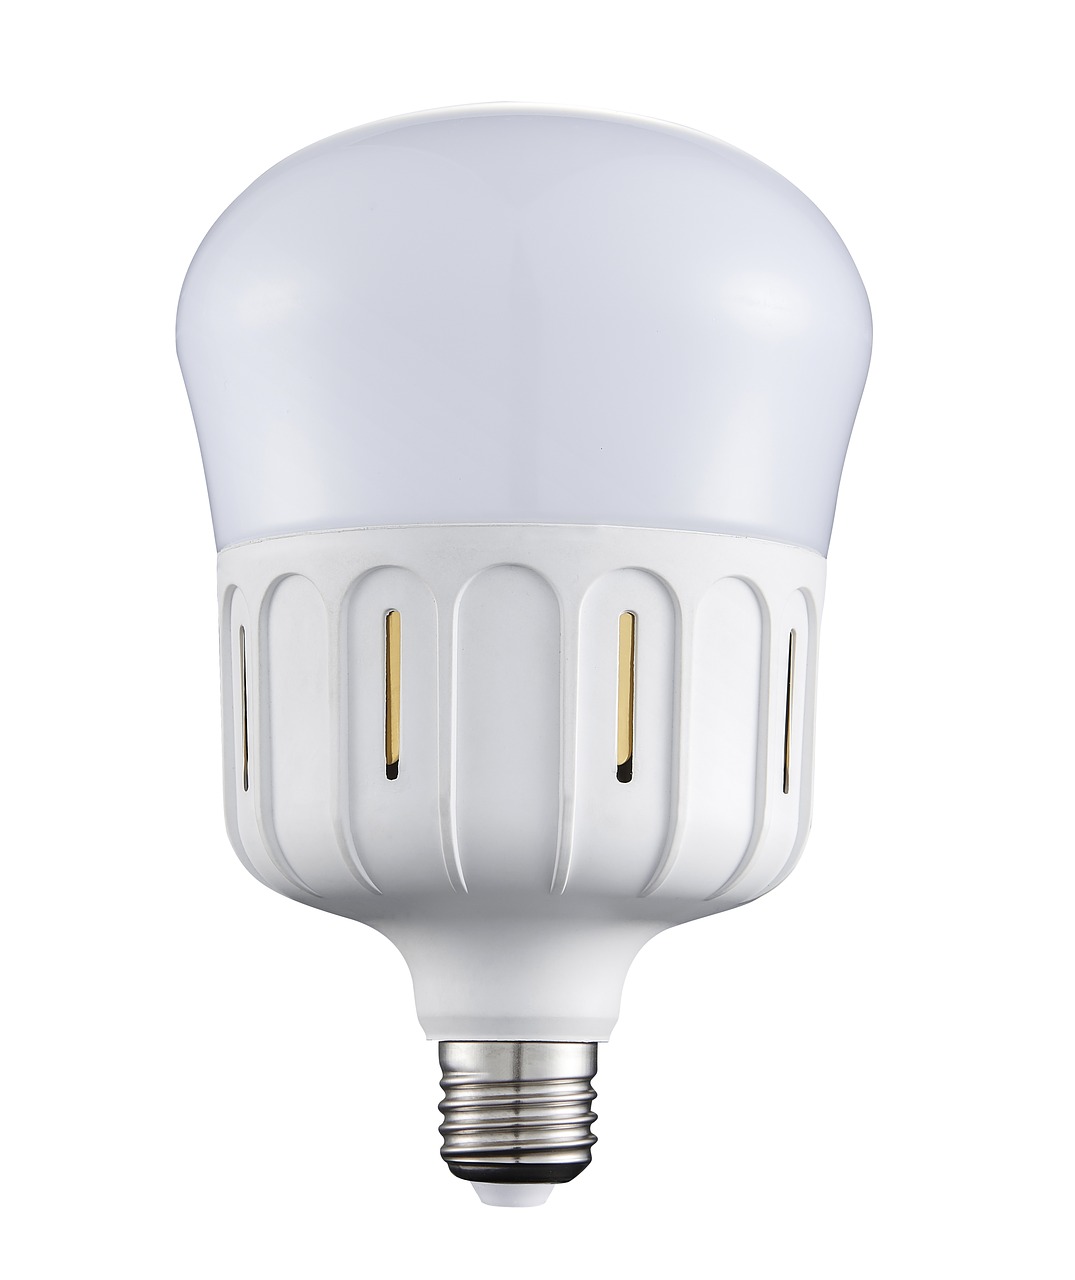 light source products bulb spark free photo